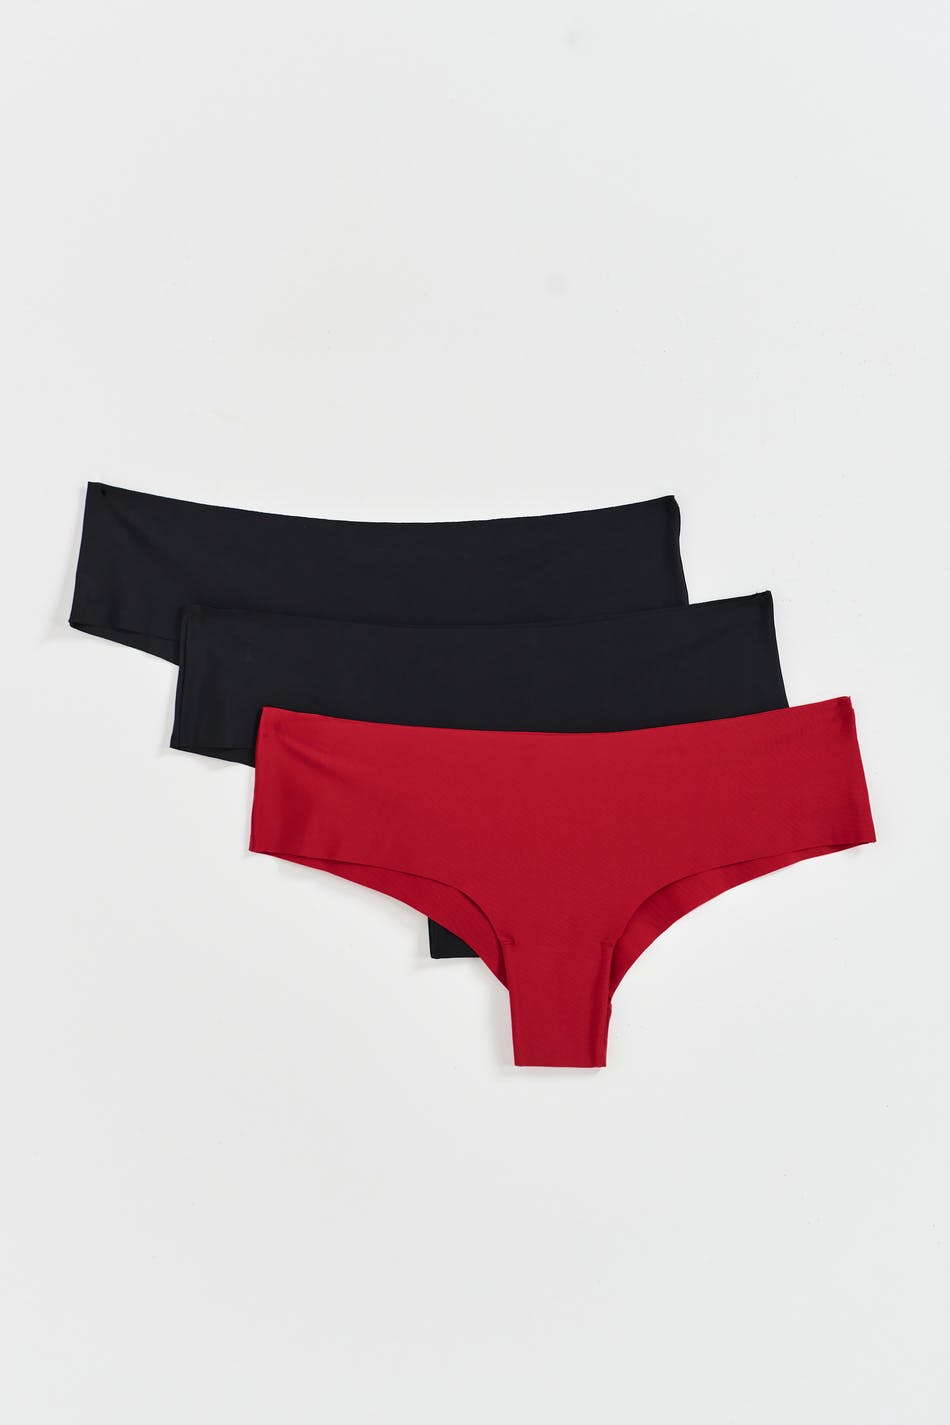 Gina Tricot - 3-pack invisible brazilian - trosor-3-pack - Red - S - Female